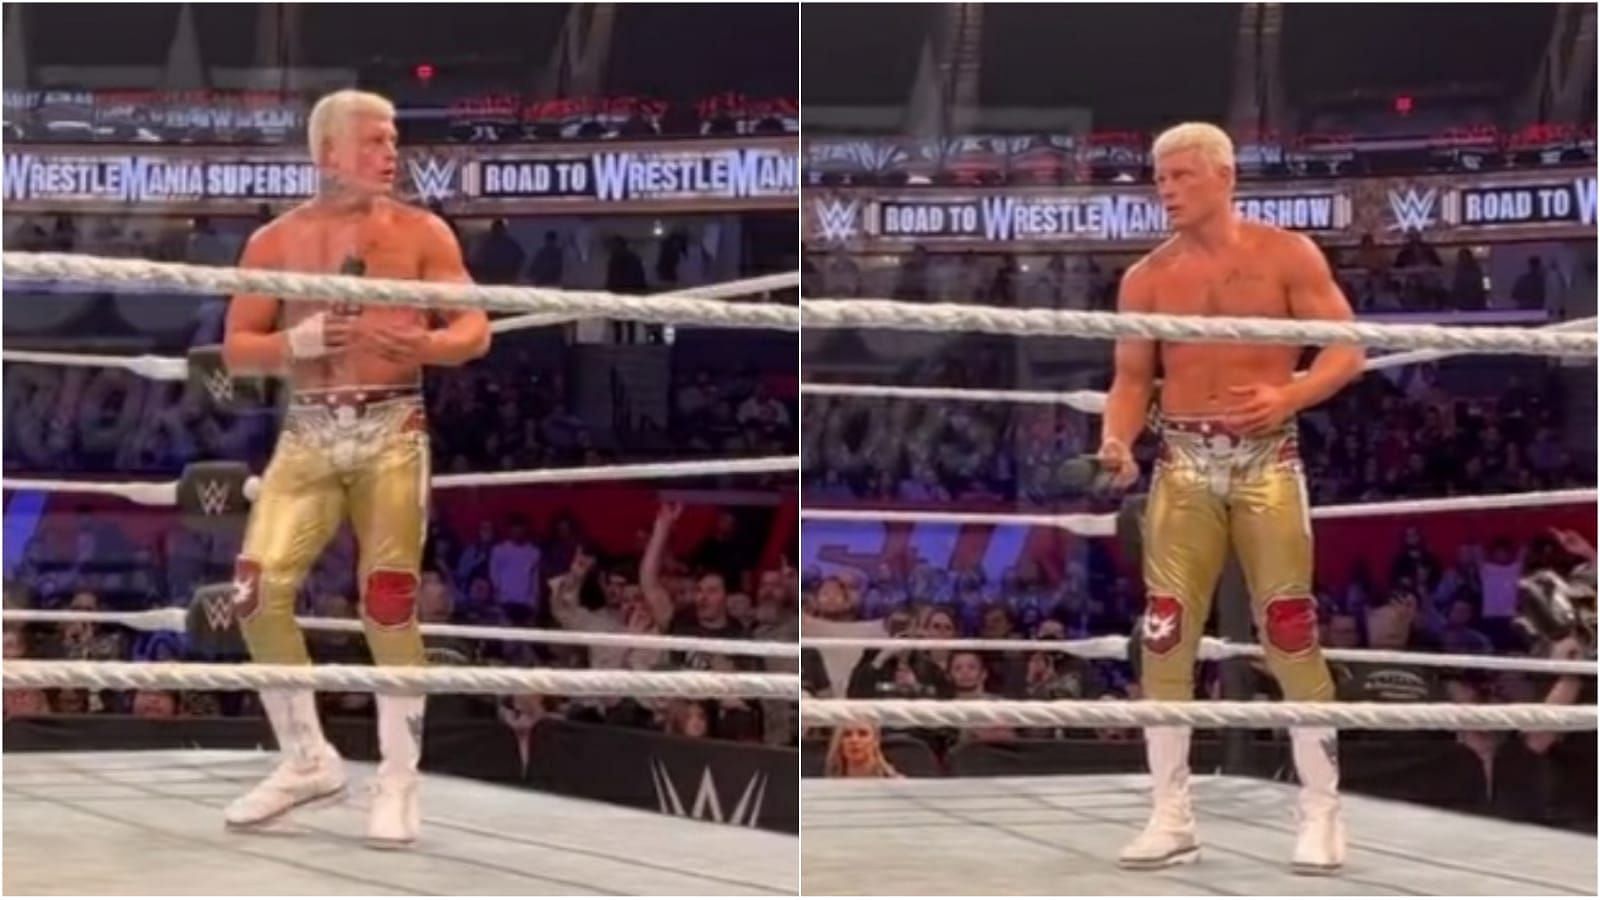 Cody Rhodes returned from injury at WWE Royal Rumble!